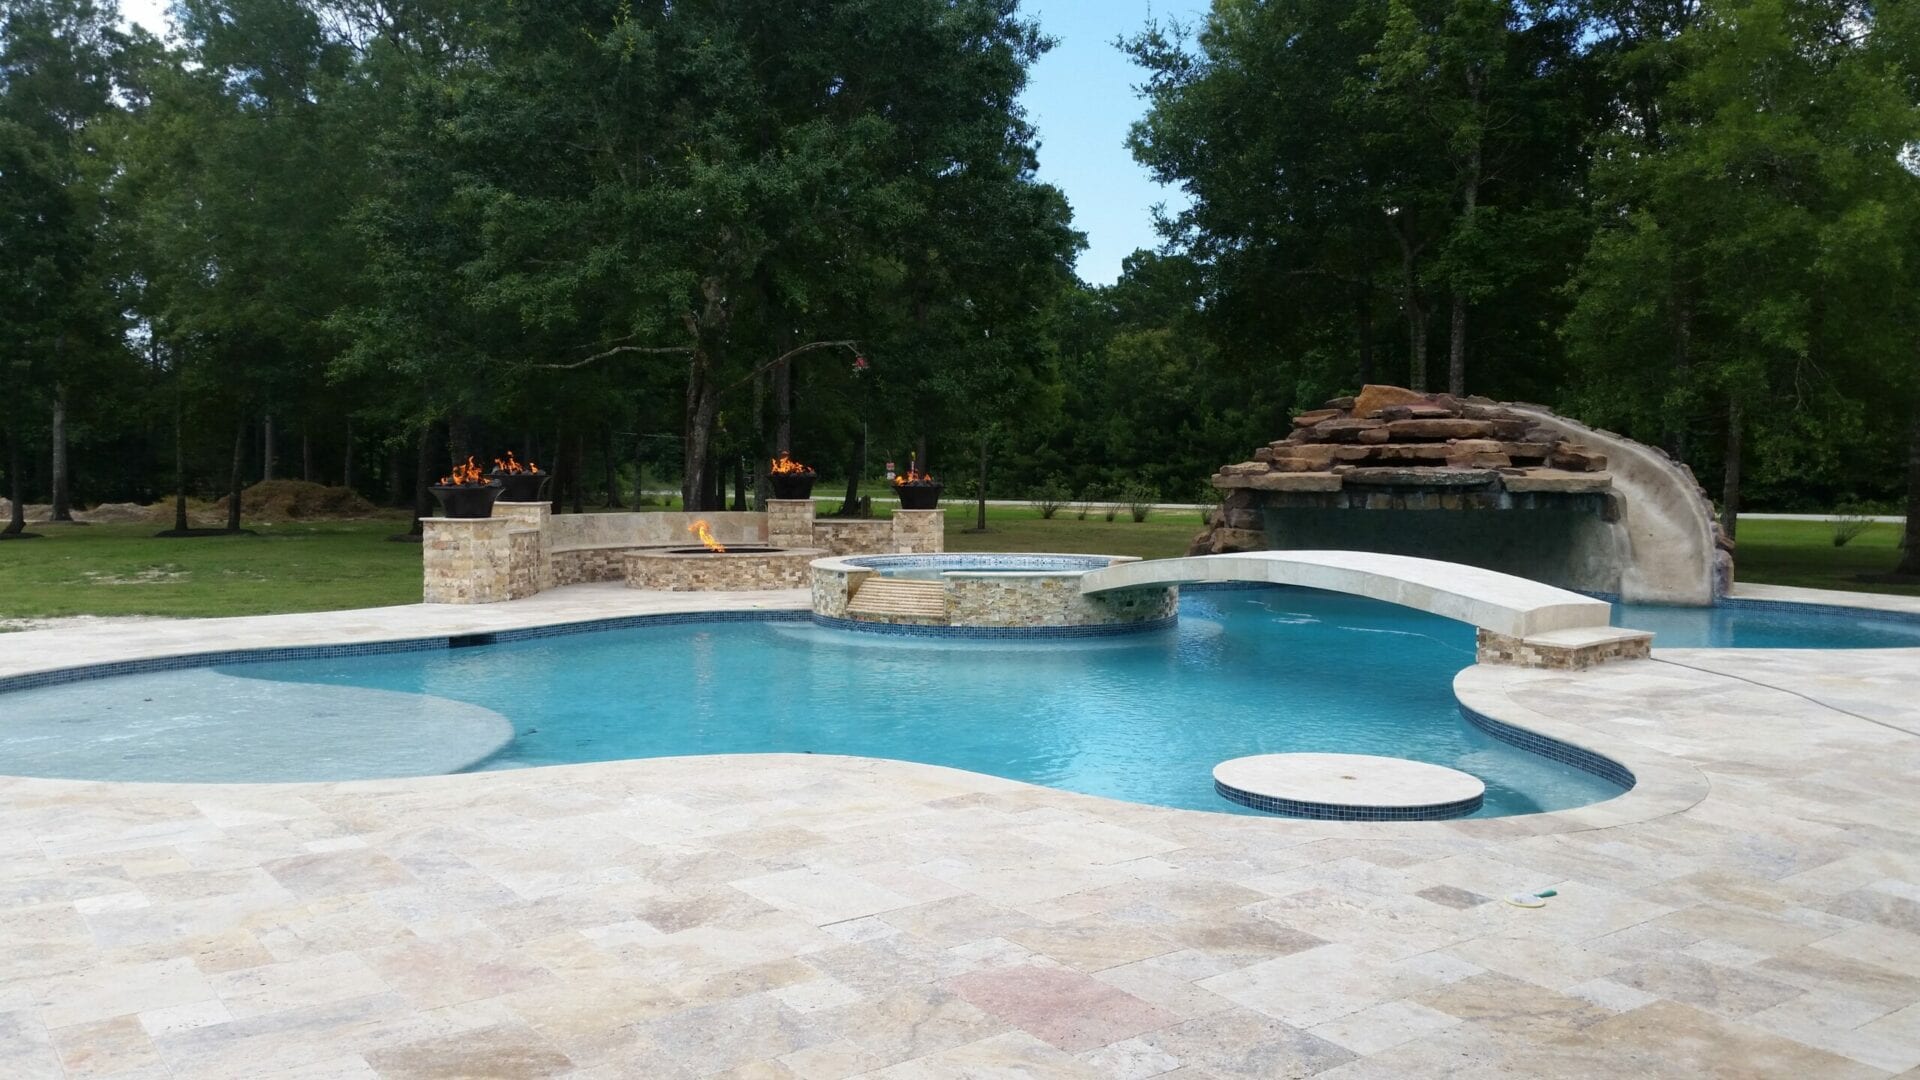 A pool with a rock wall and steps leading to the pool.